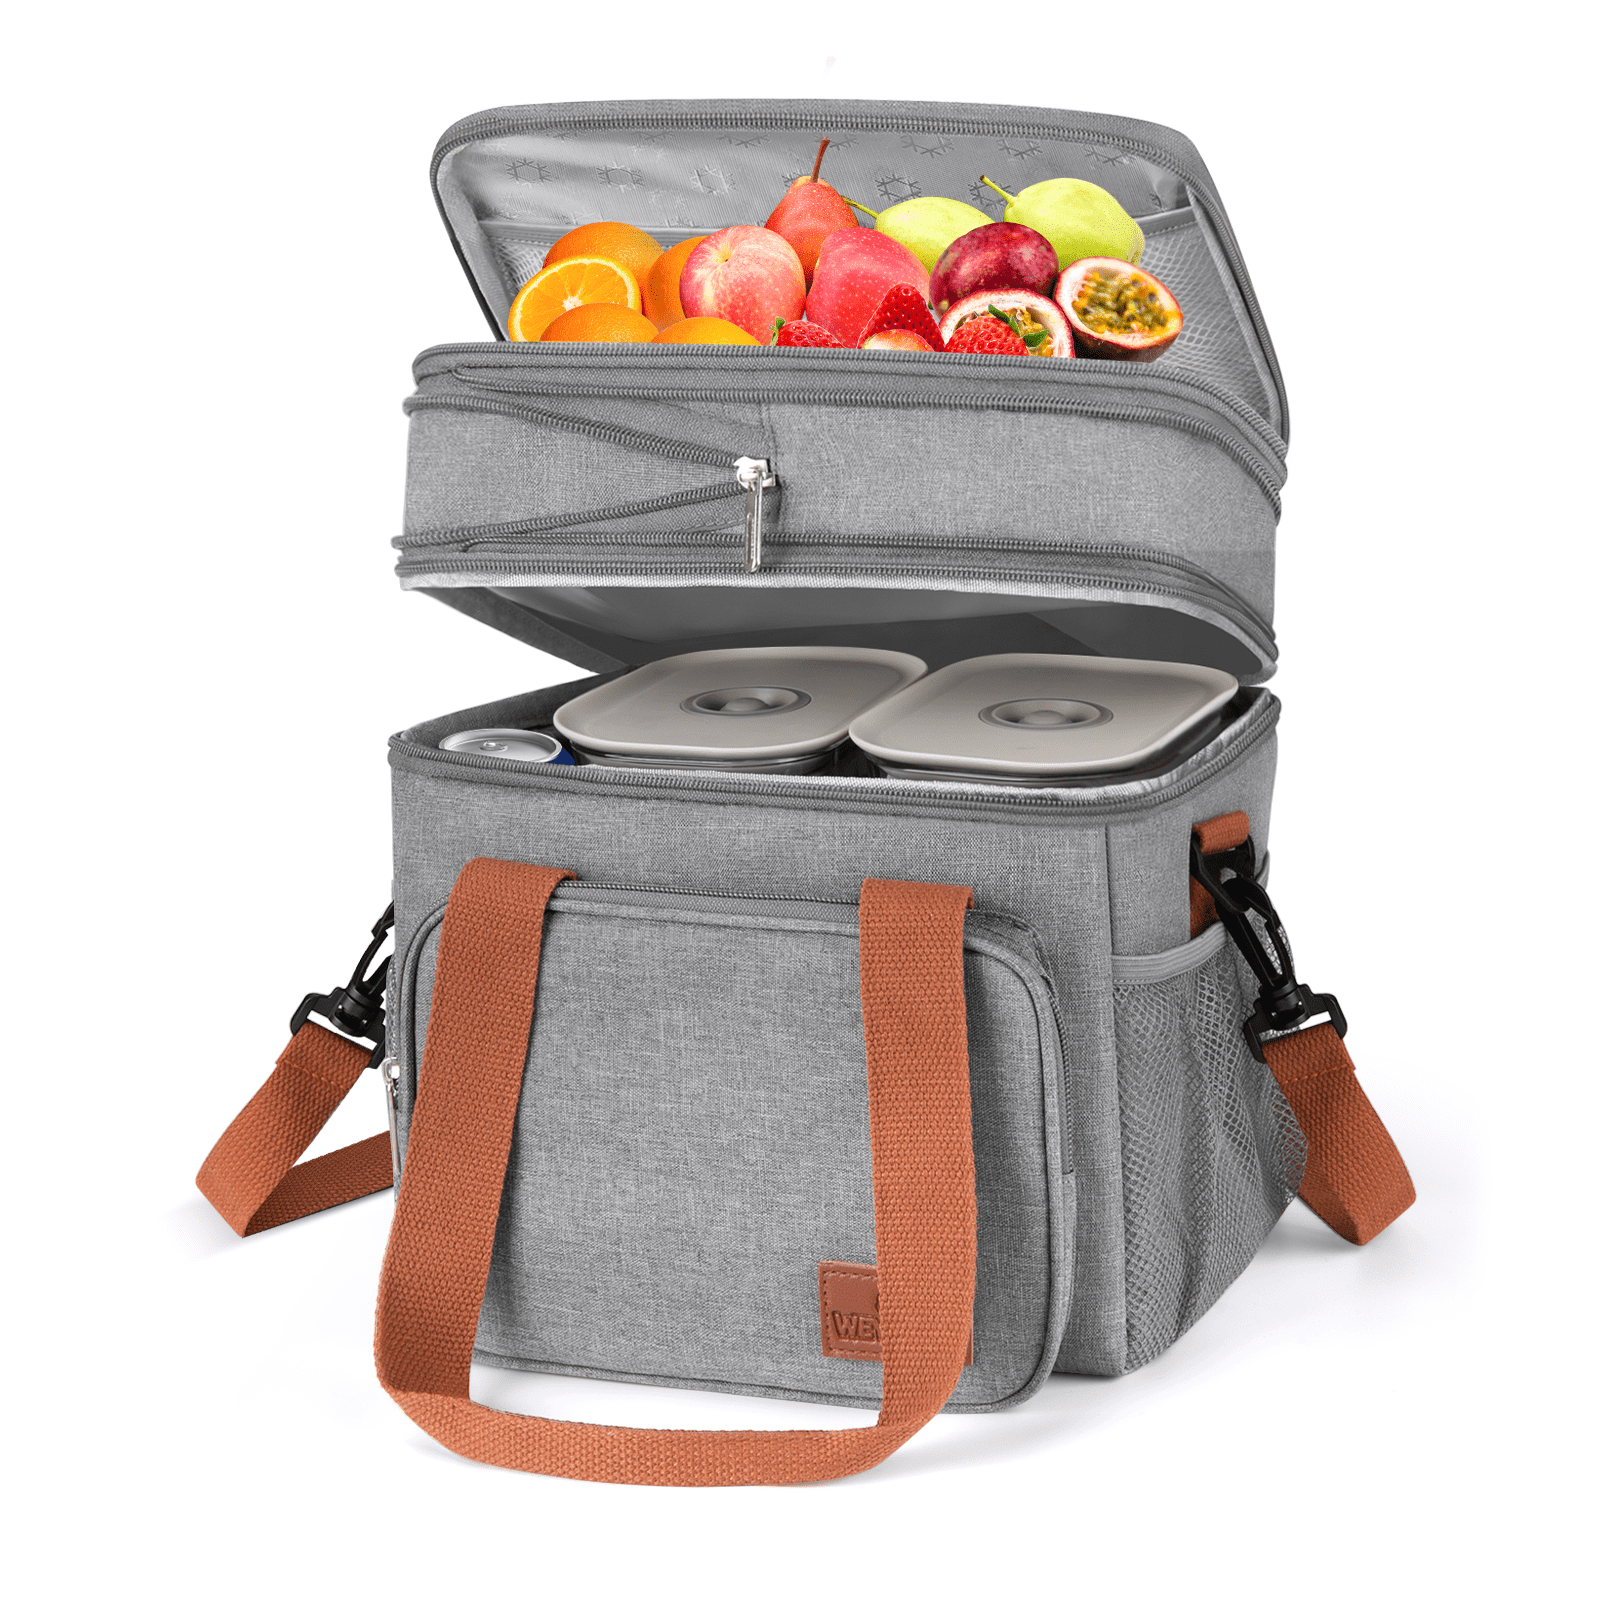 Cshidworld Lunch Bags for Women Men, Reusable Insulated Lunch Bag Tote Lunch Box for Office Work School Picnic Beach, Expandable Leakproof Cooler Bag